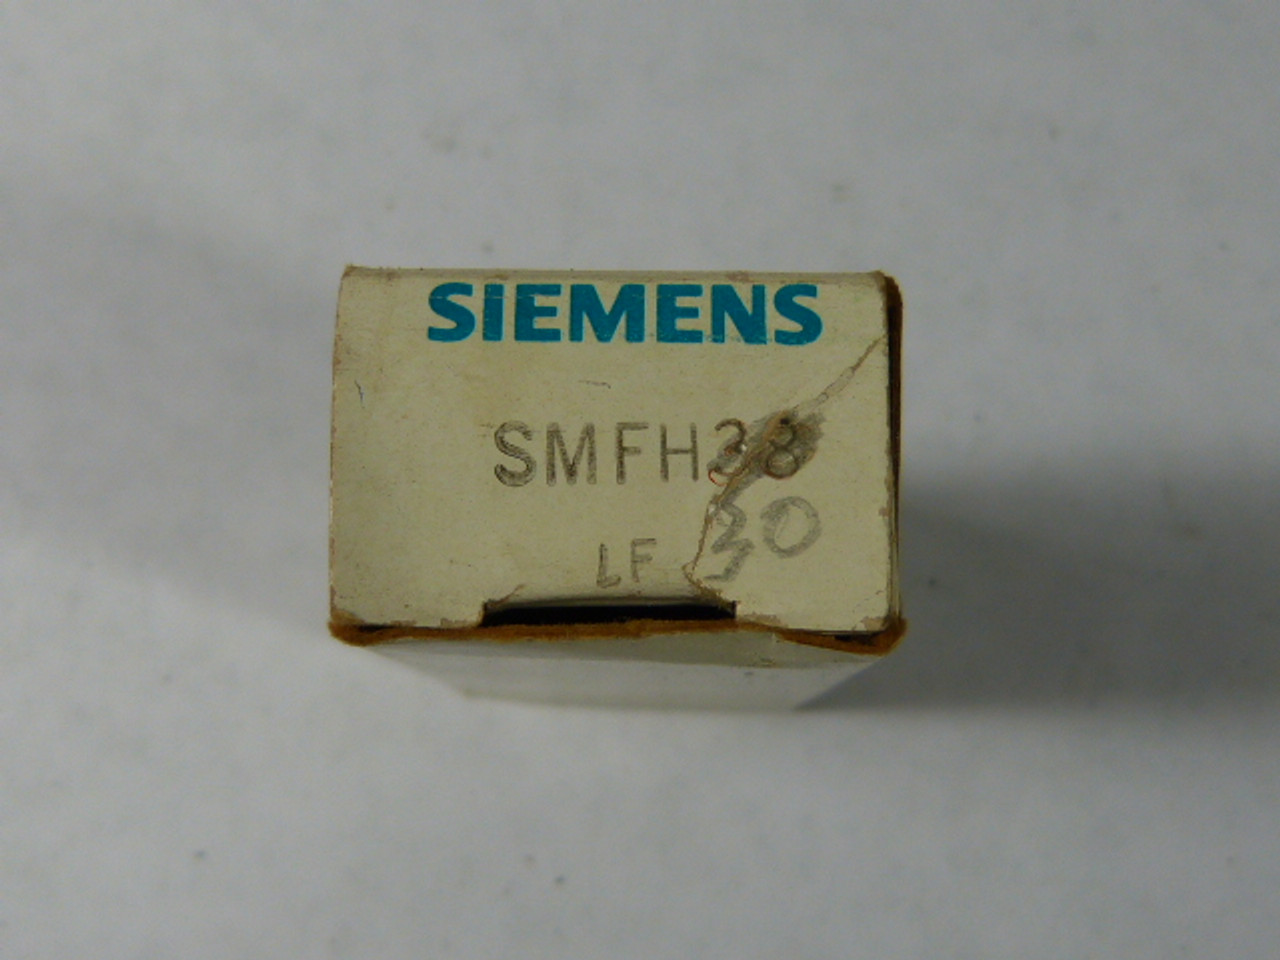 Siemens SMFH30 Thermal Overload Relay Heater Element *DAMAGED BOX* NEW